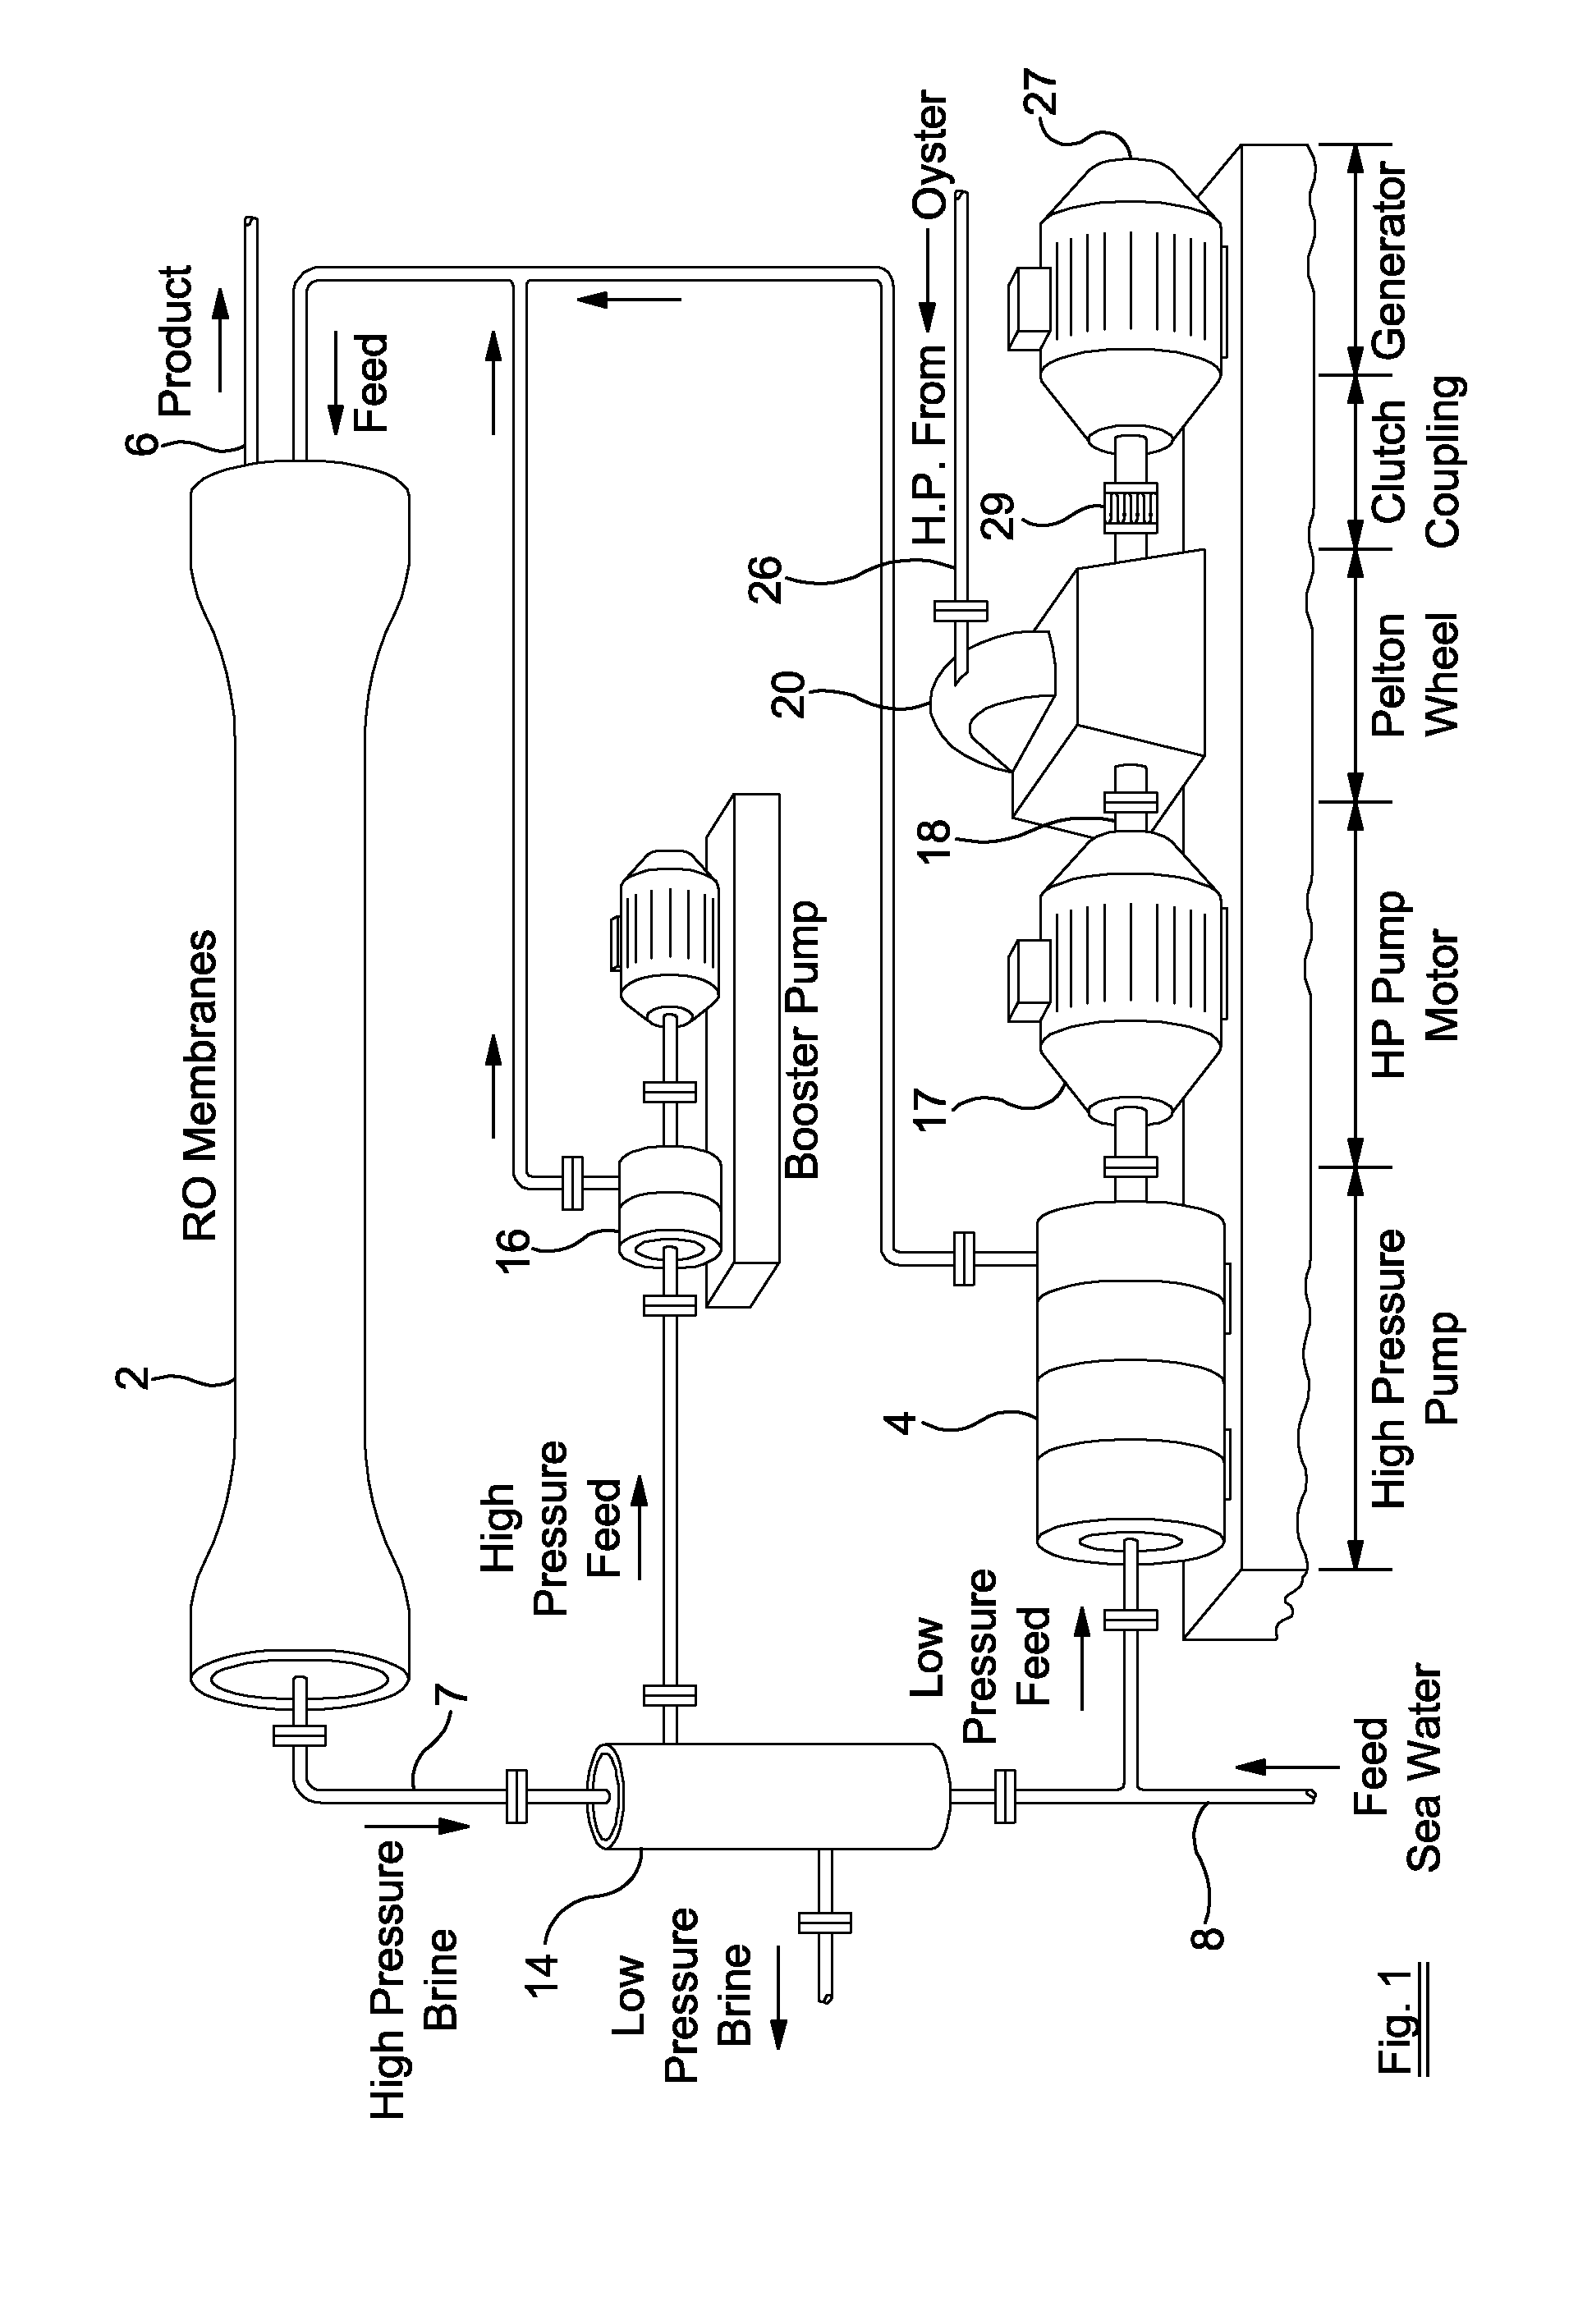 Desalination system and method